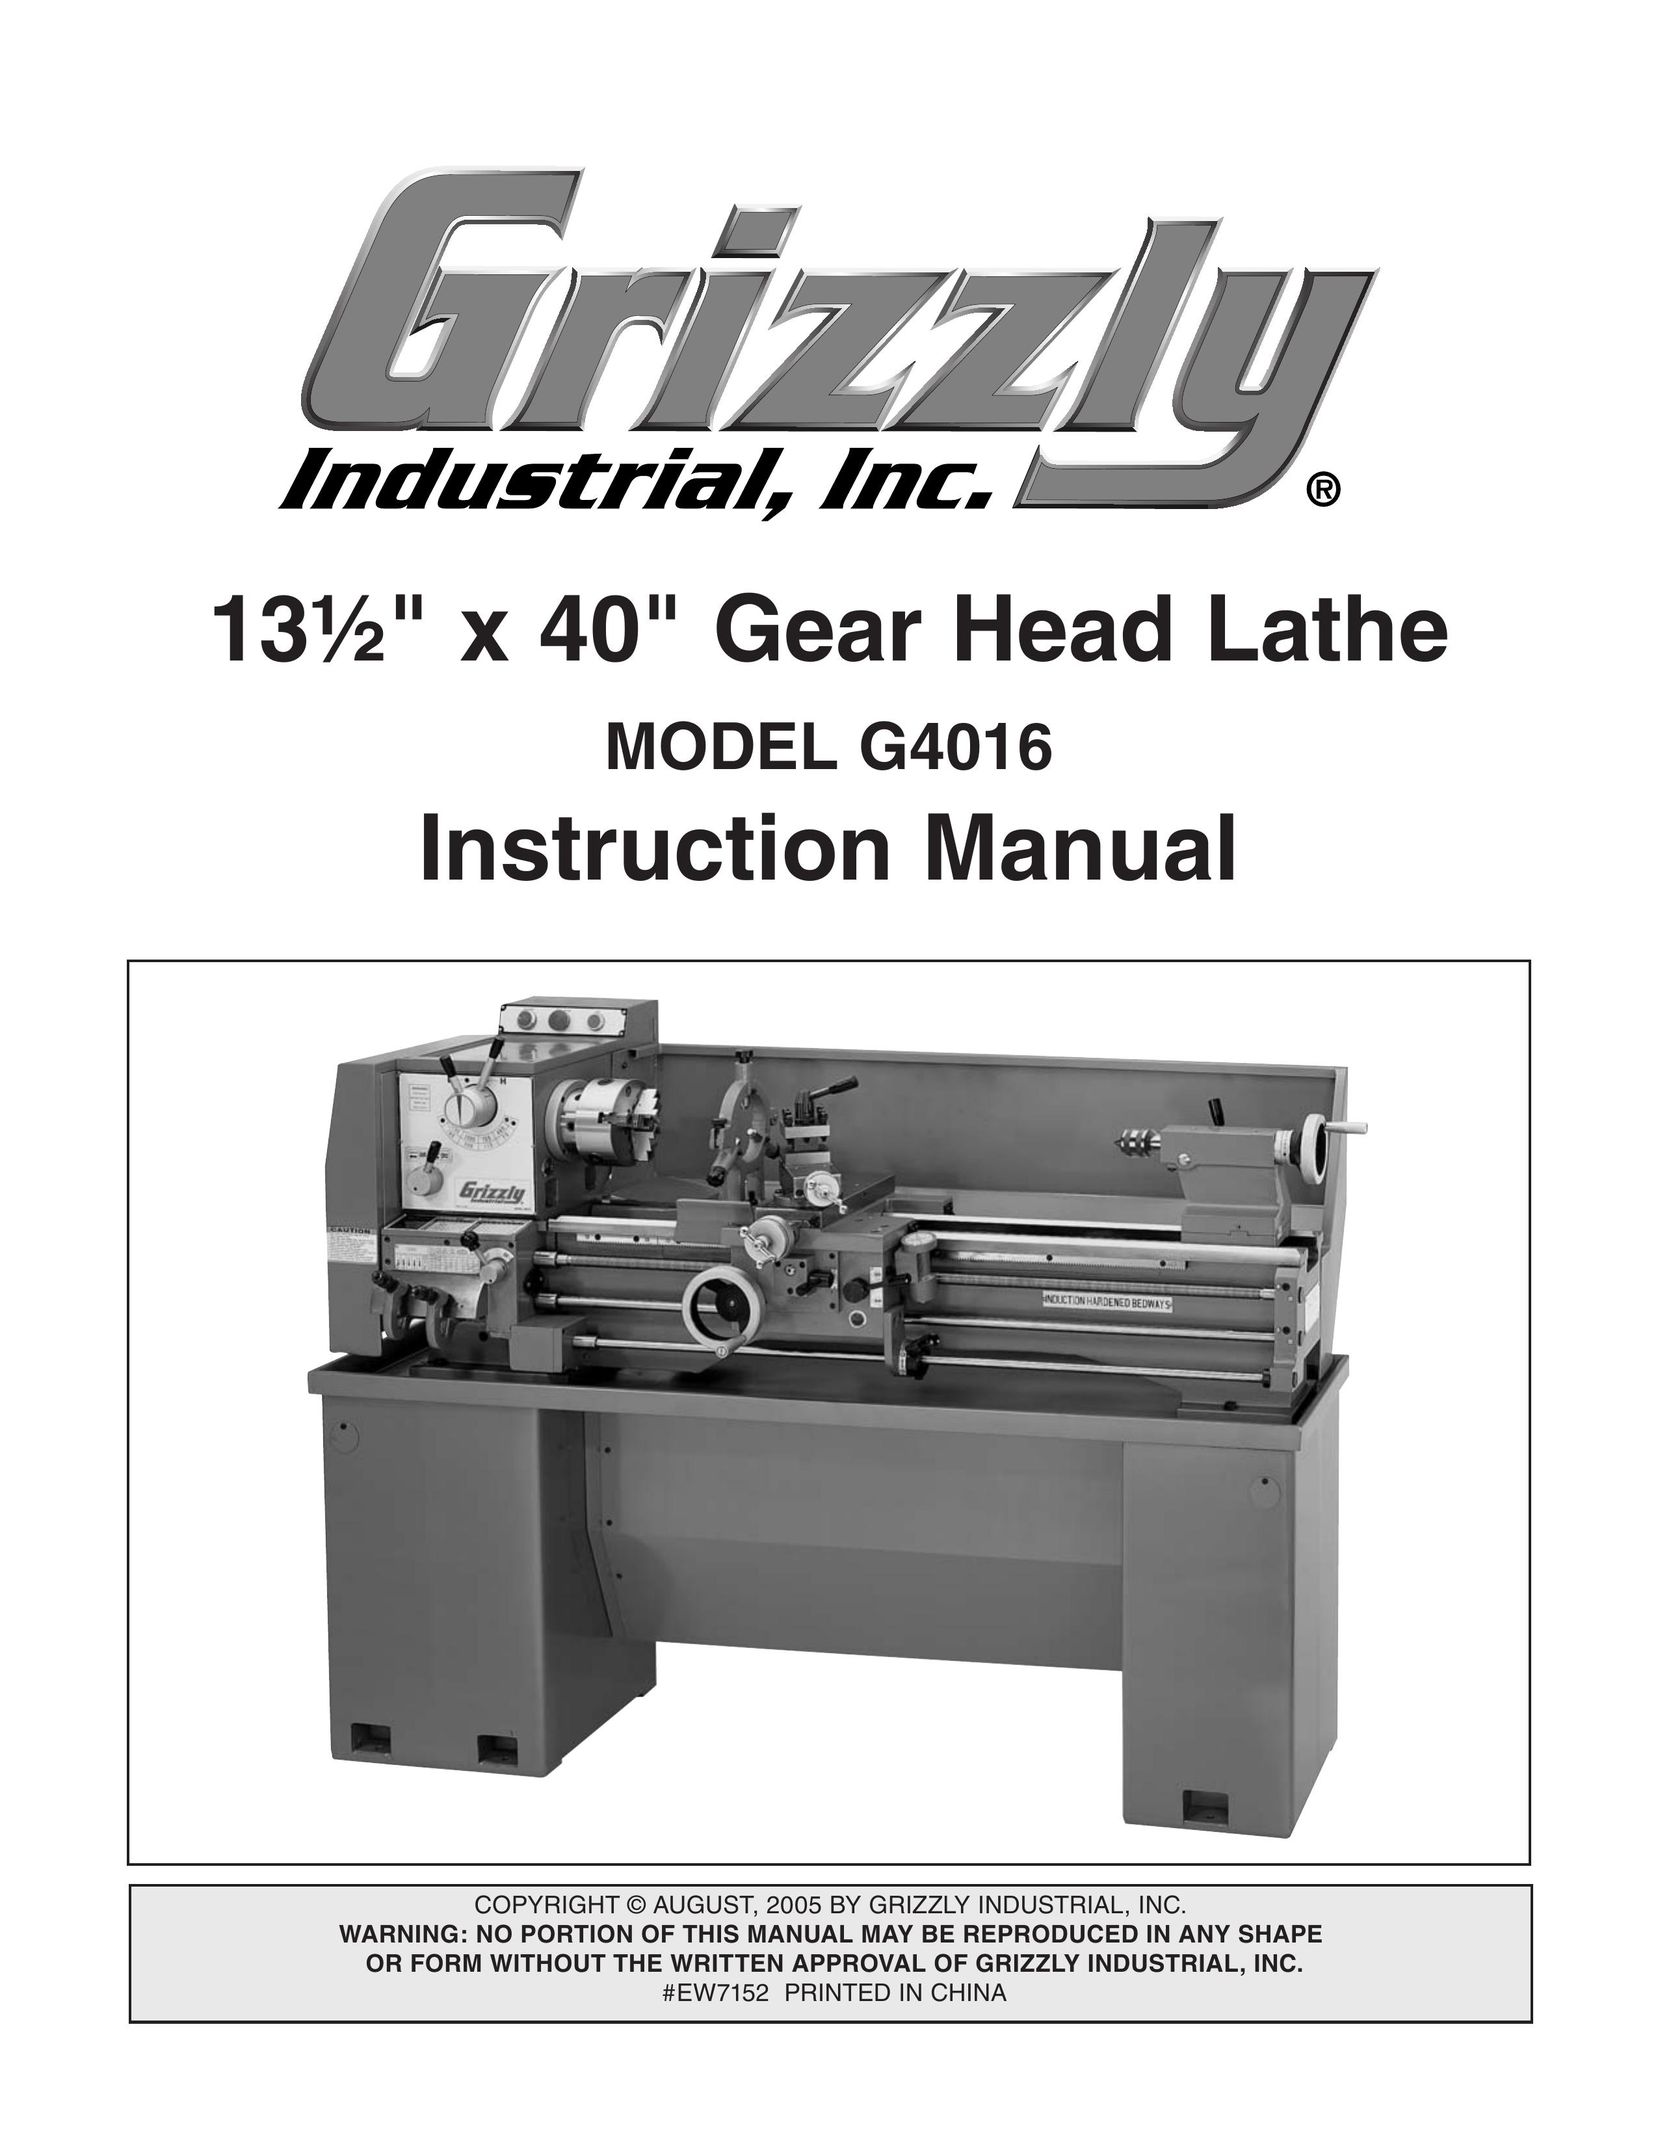 Grizzly G4016 Lathe User Manual